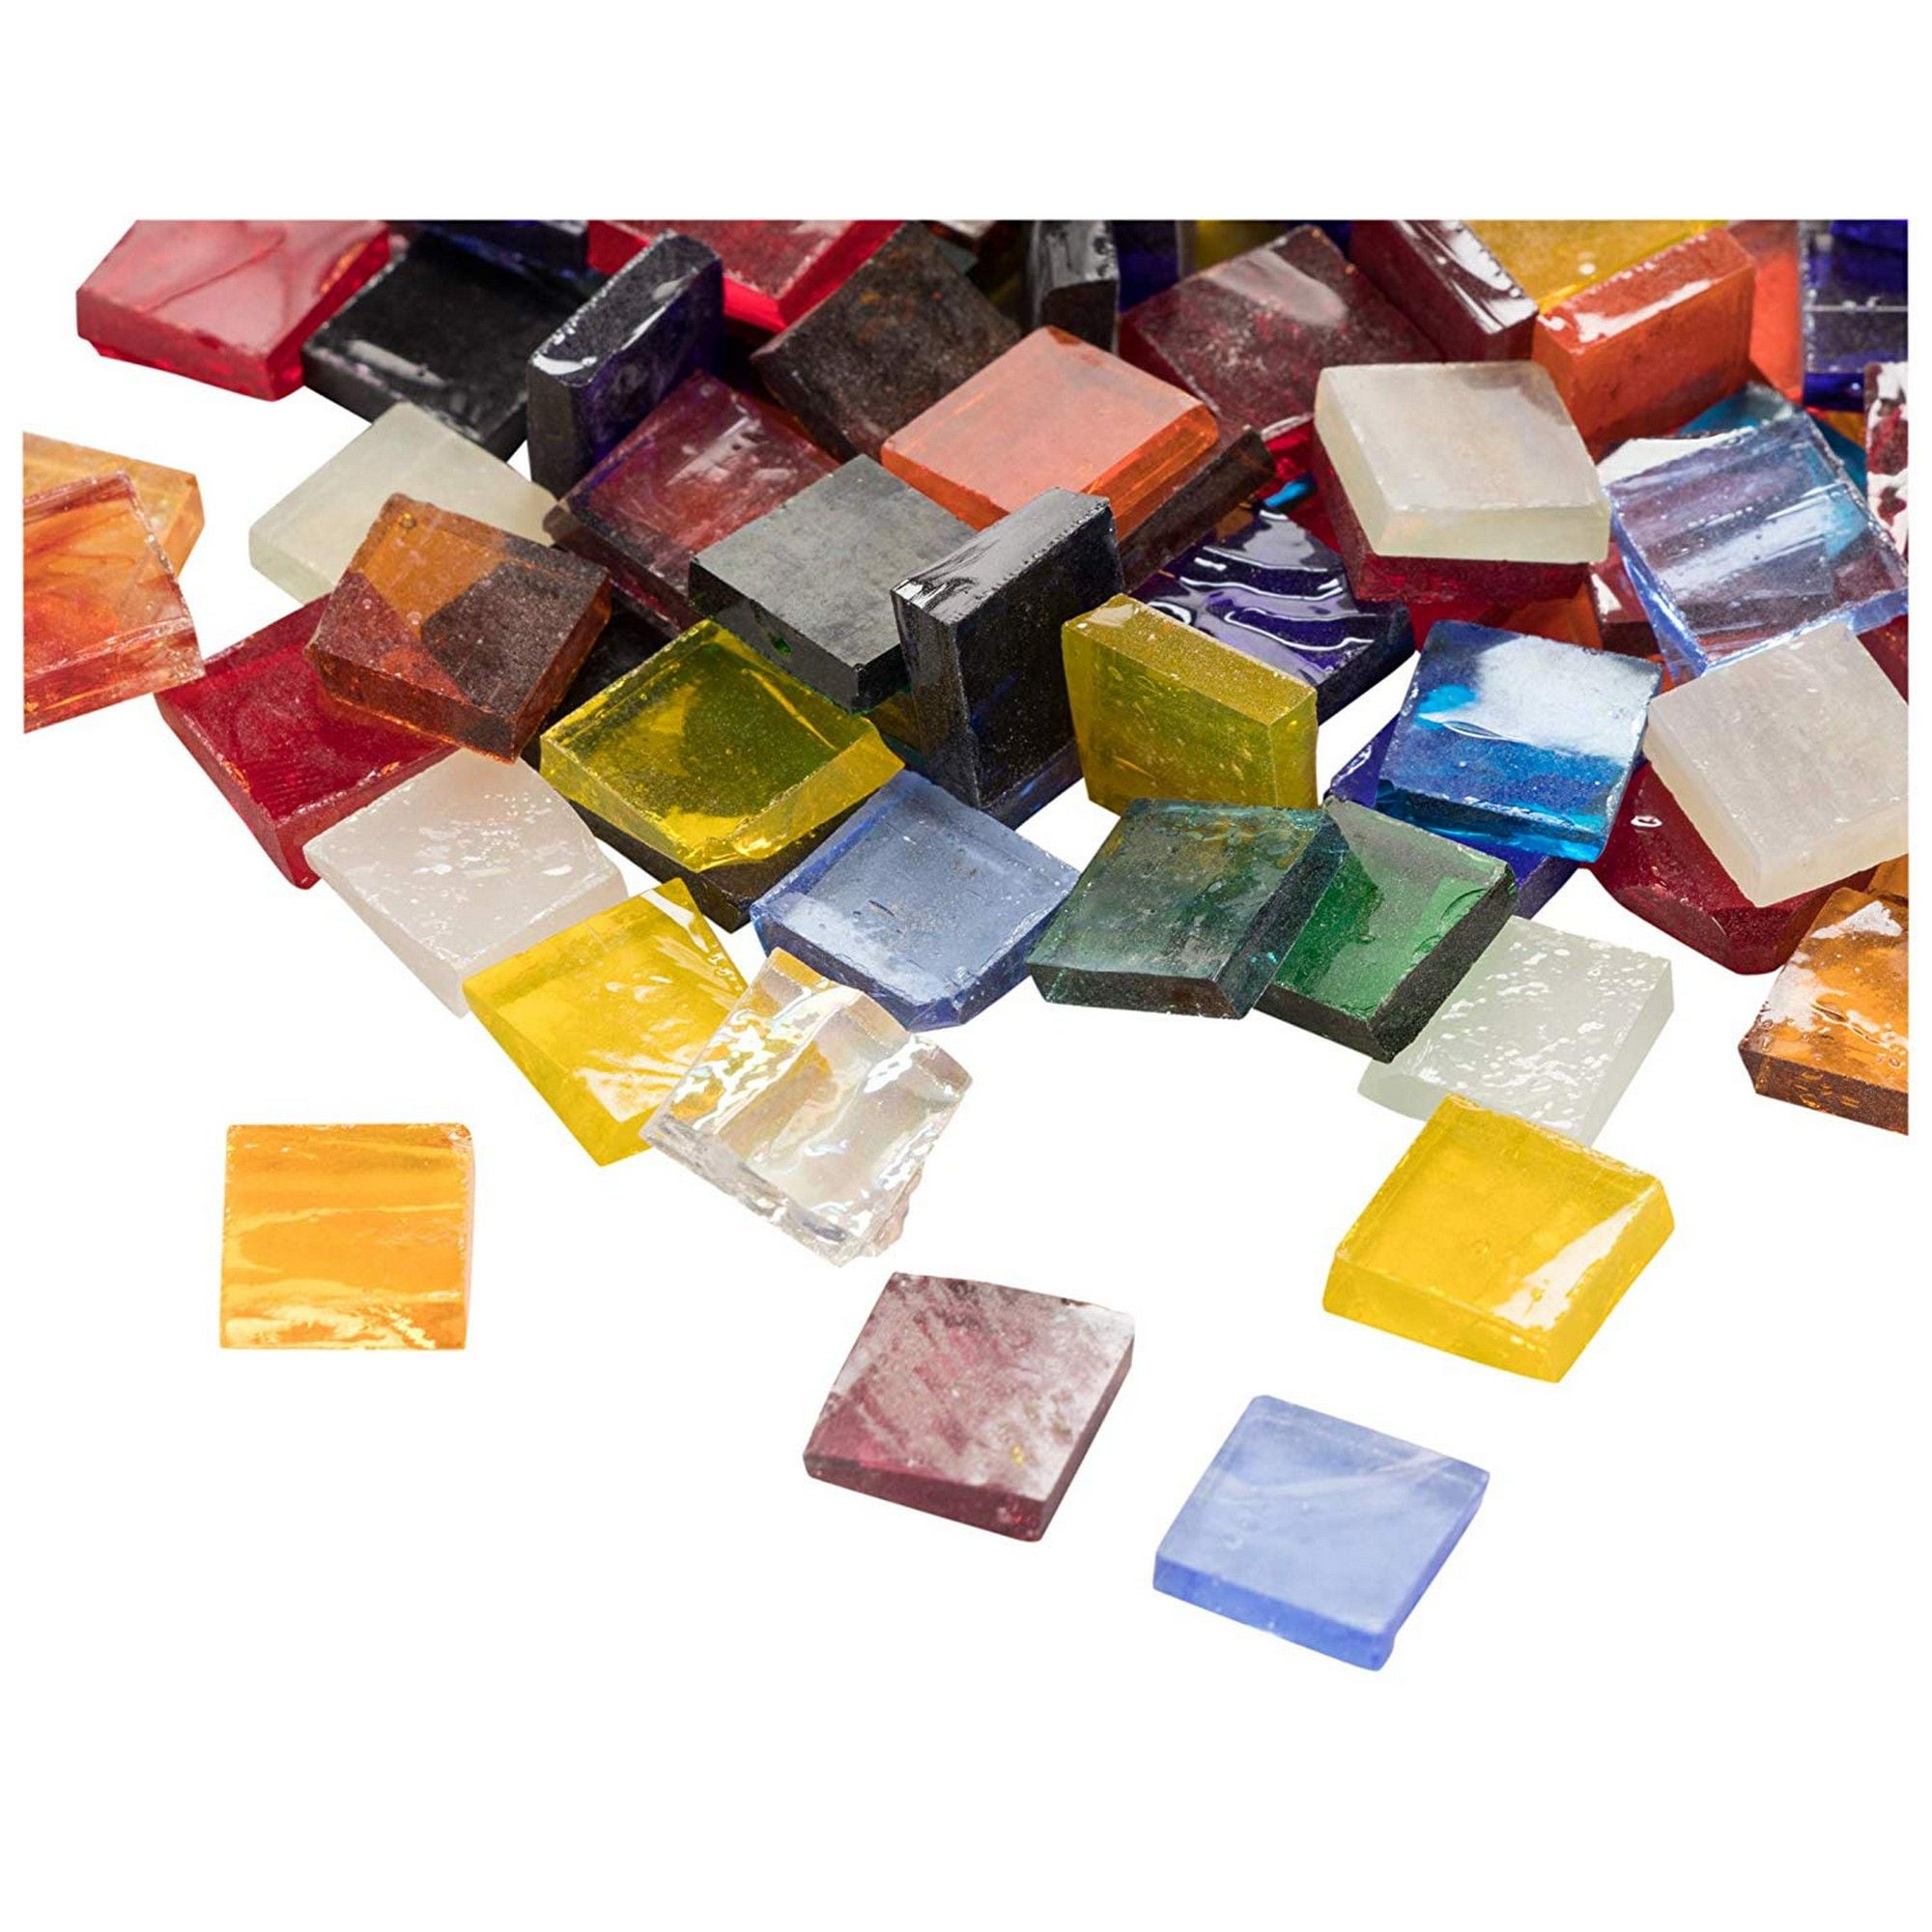 Mosaic Tiles 1000 Pack Glass, Stained Glass Mosaic Tiles In Bulk